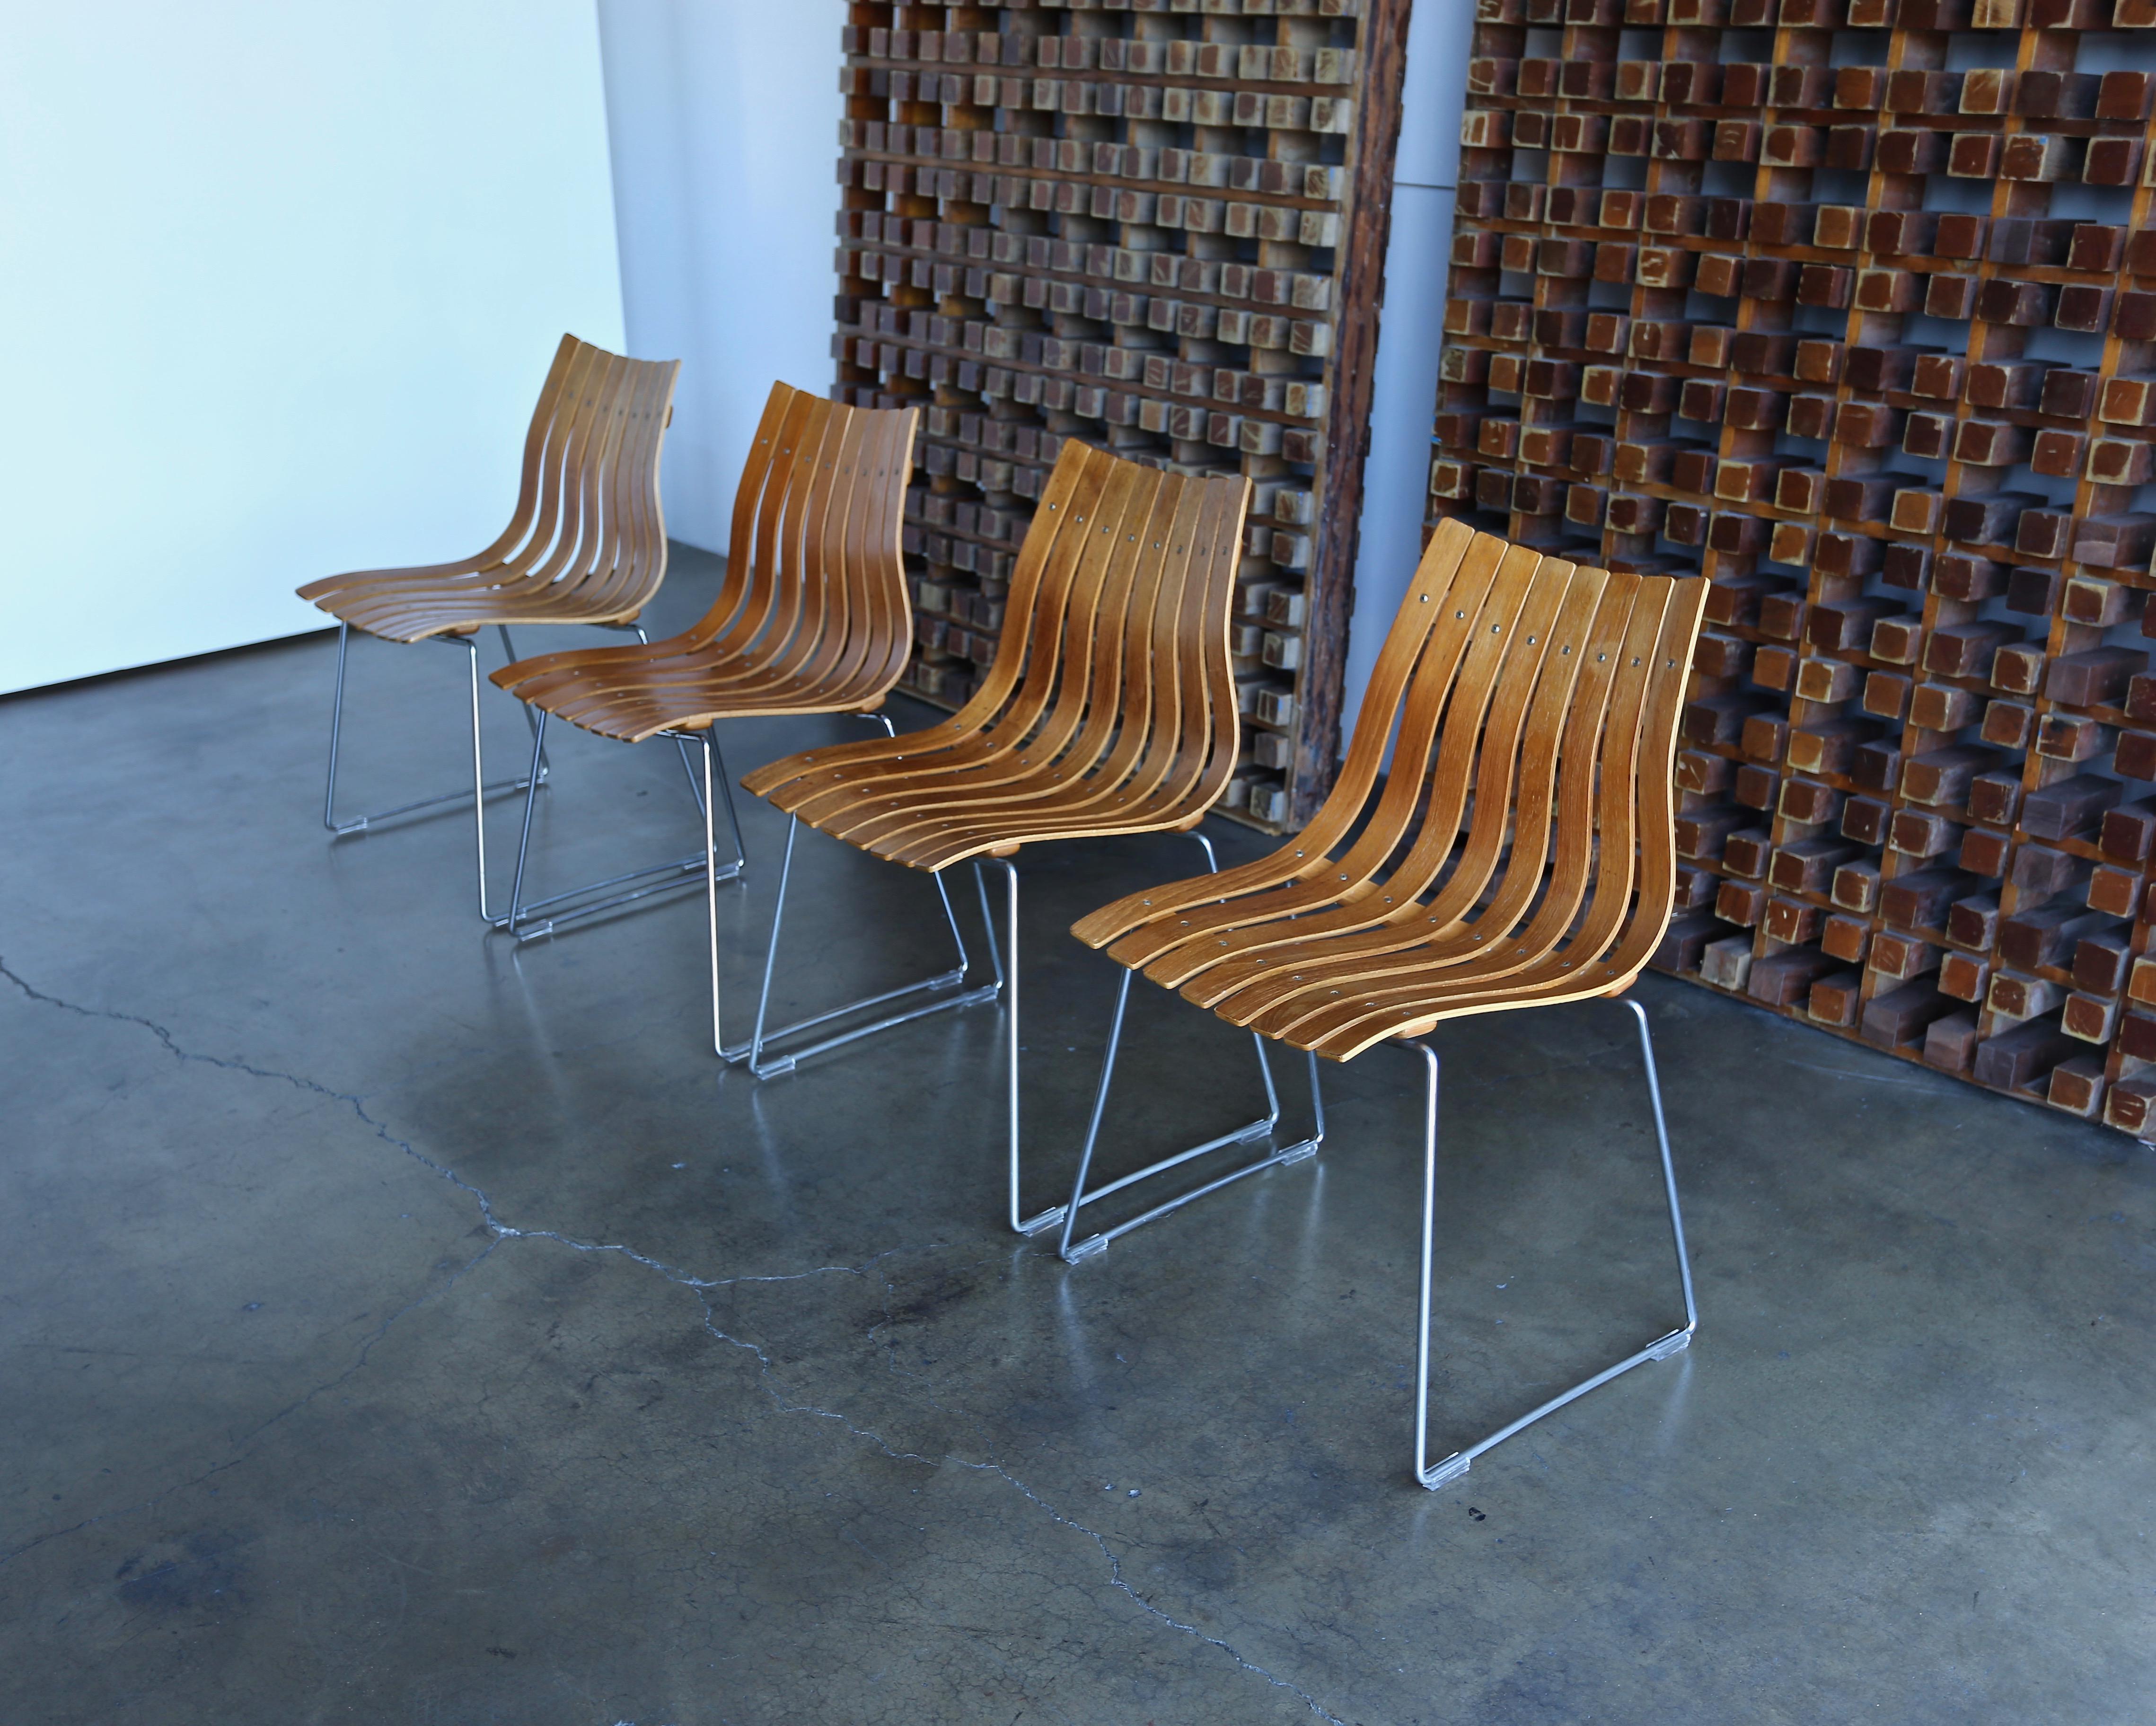 Hans Brattrud teak bentwood Scandia dining chairs for Hove Mobler, Norway.